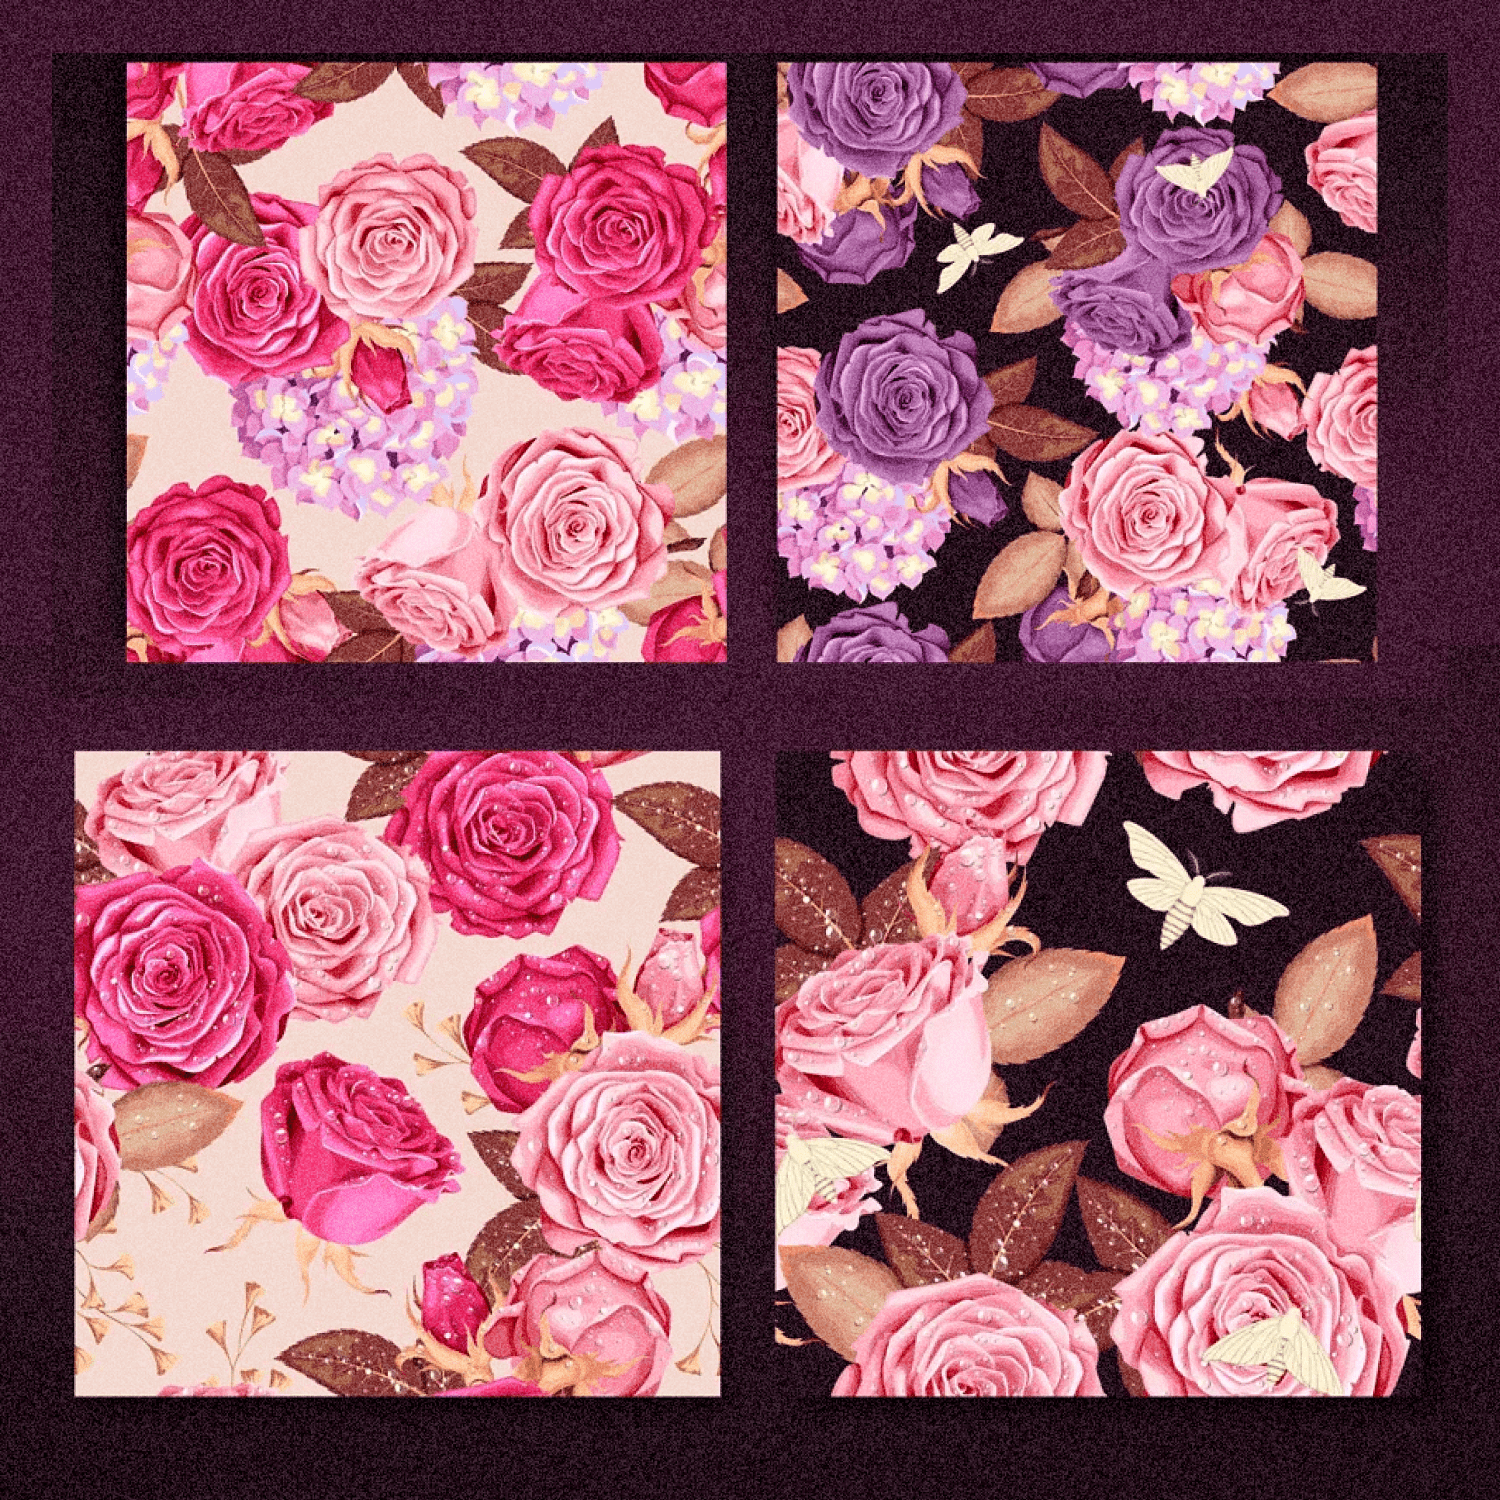 Rose Patterns cover.